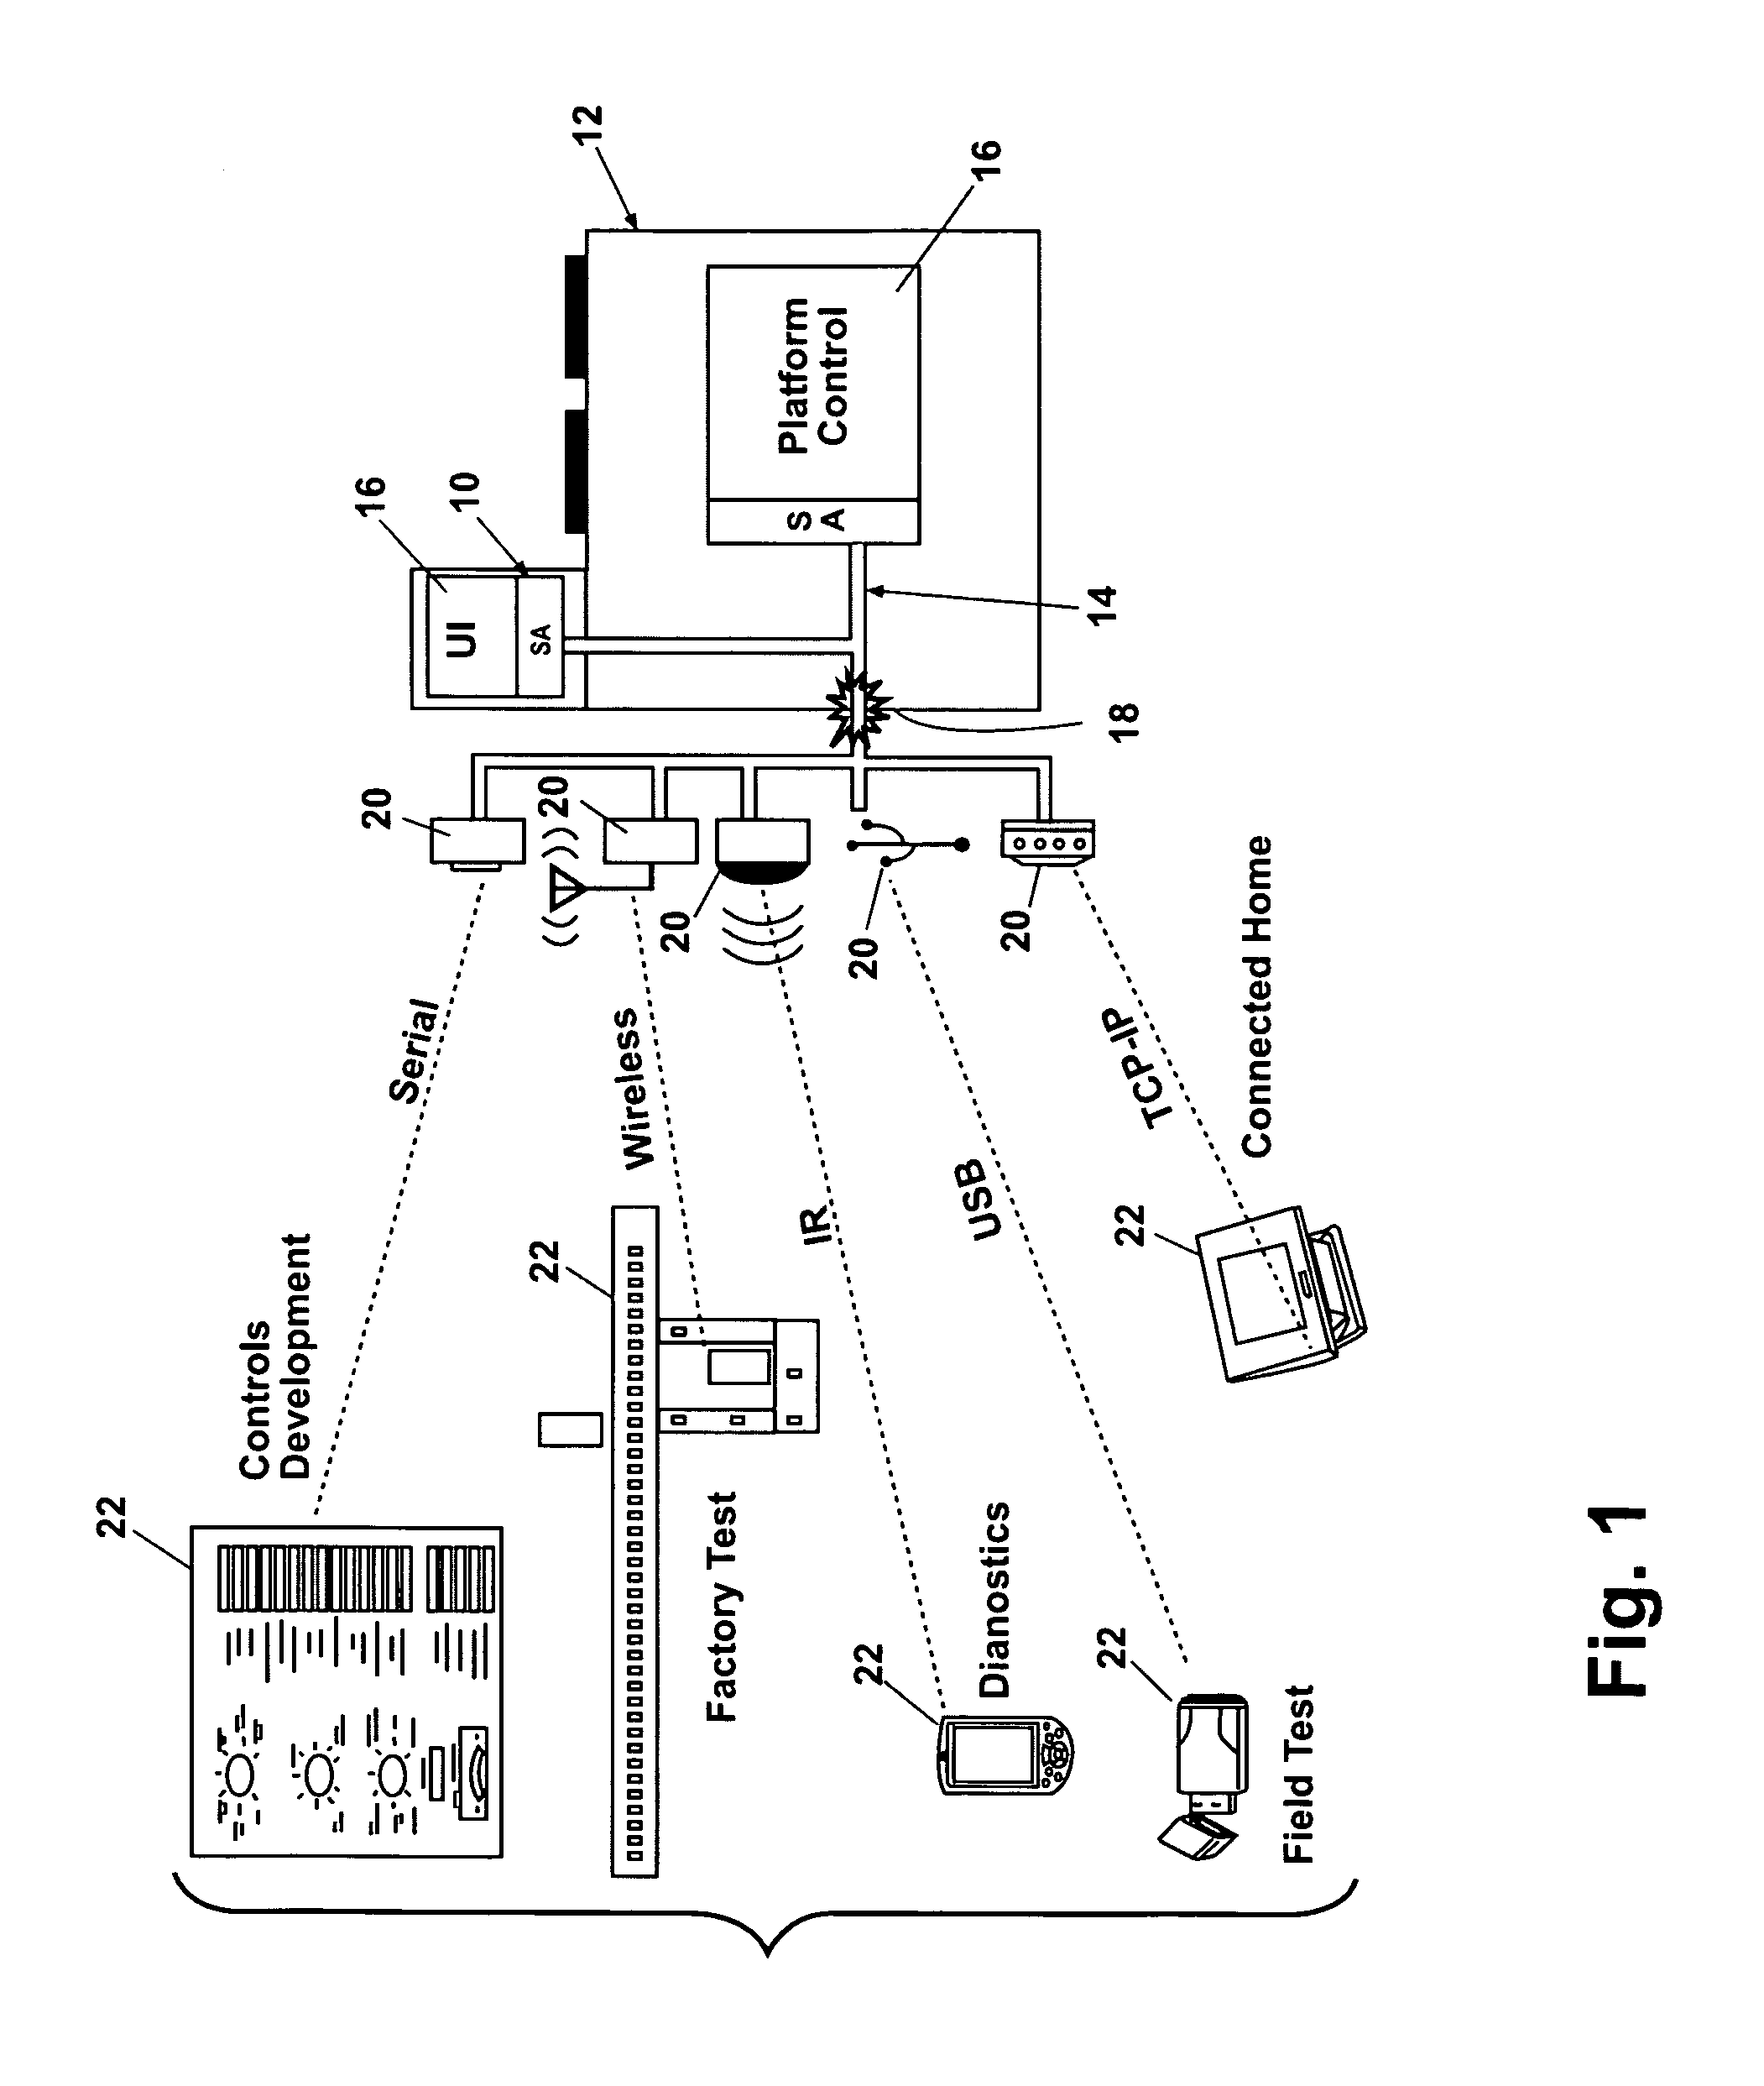 Distributed object-oriented appliance control system